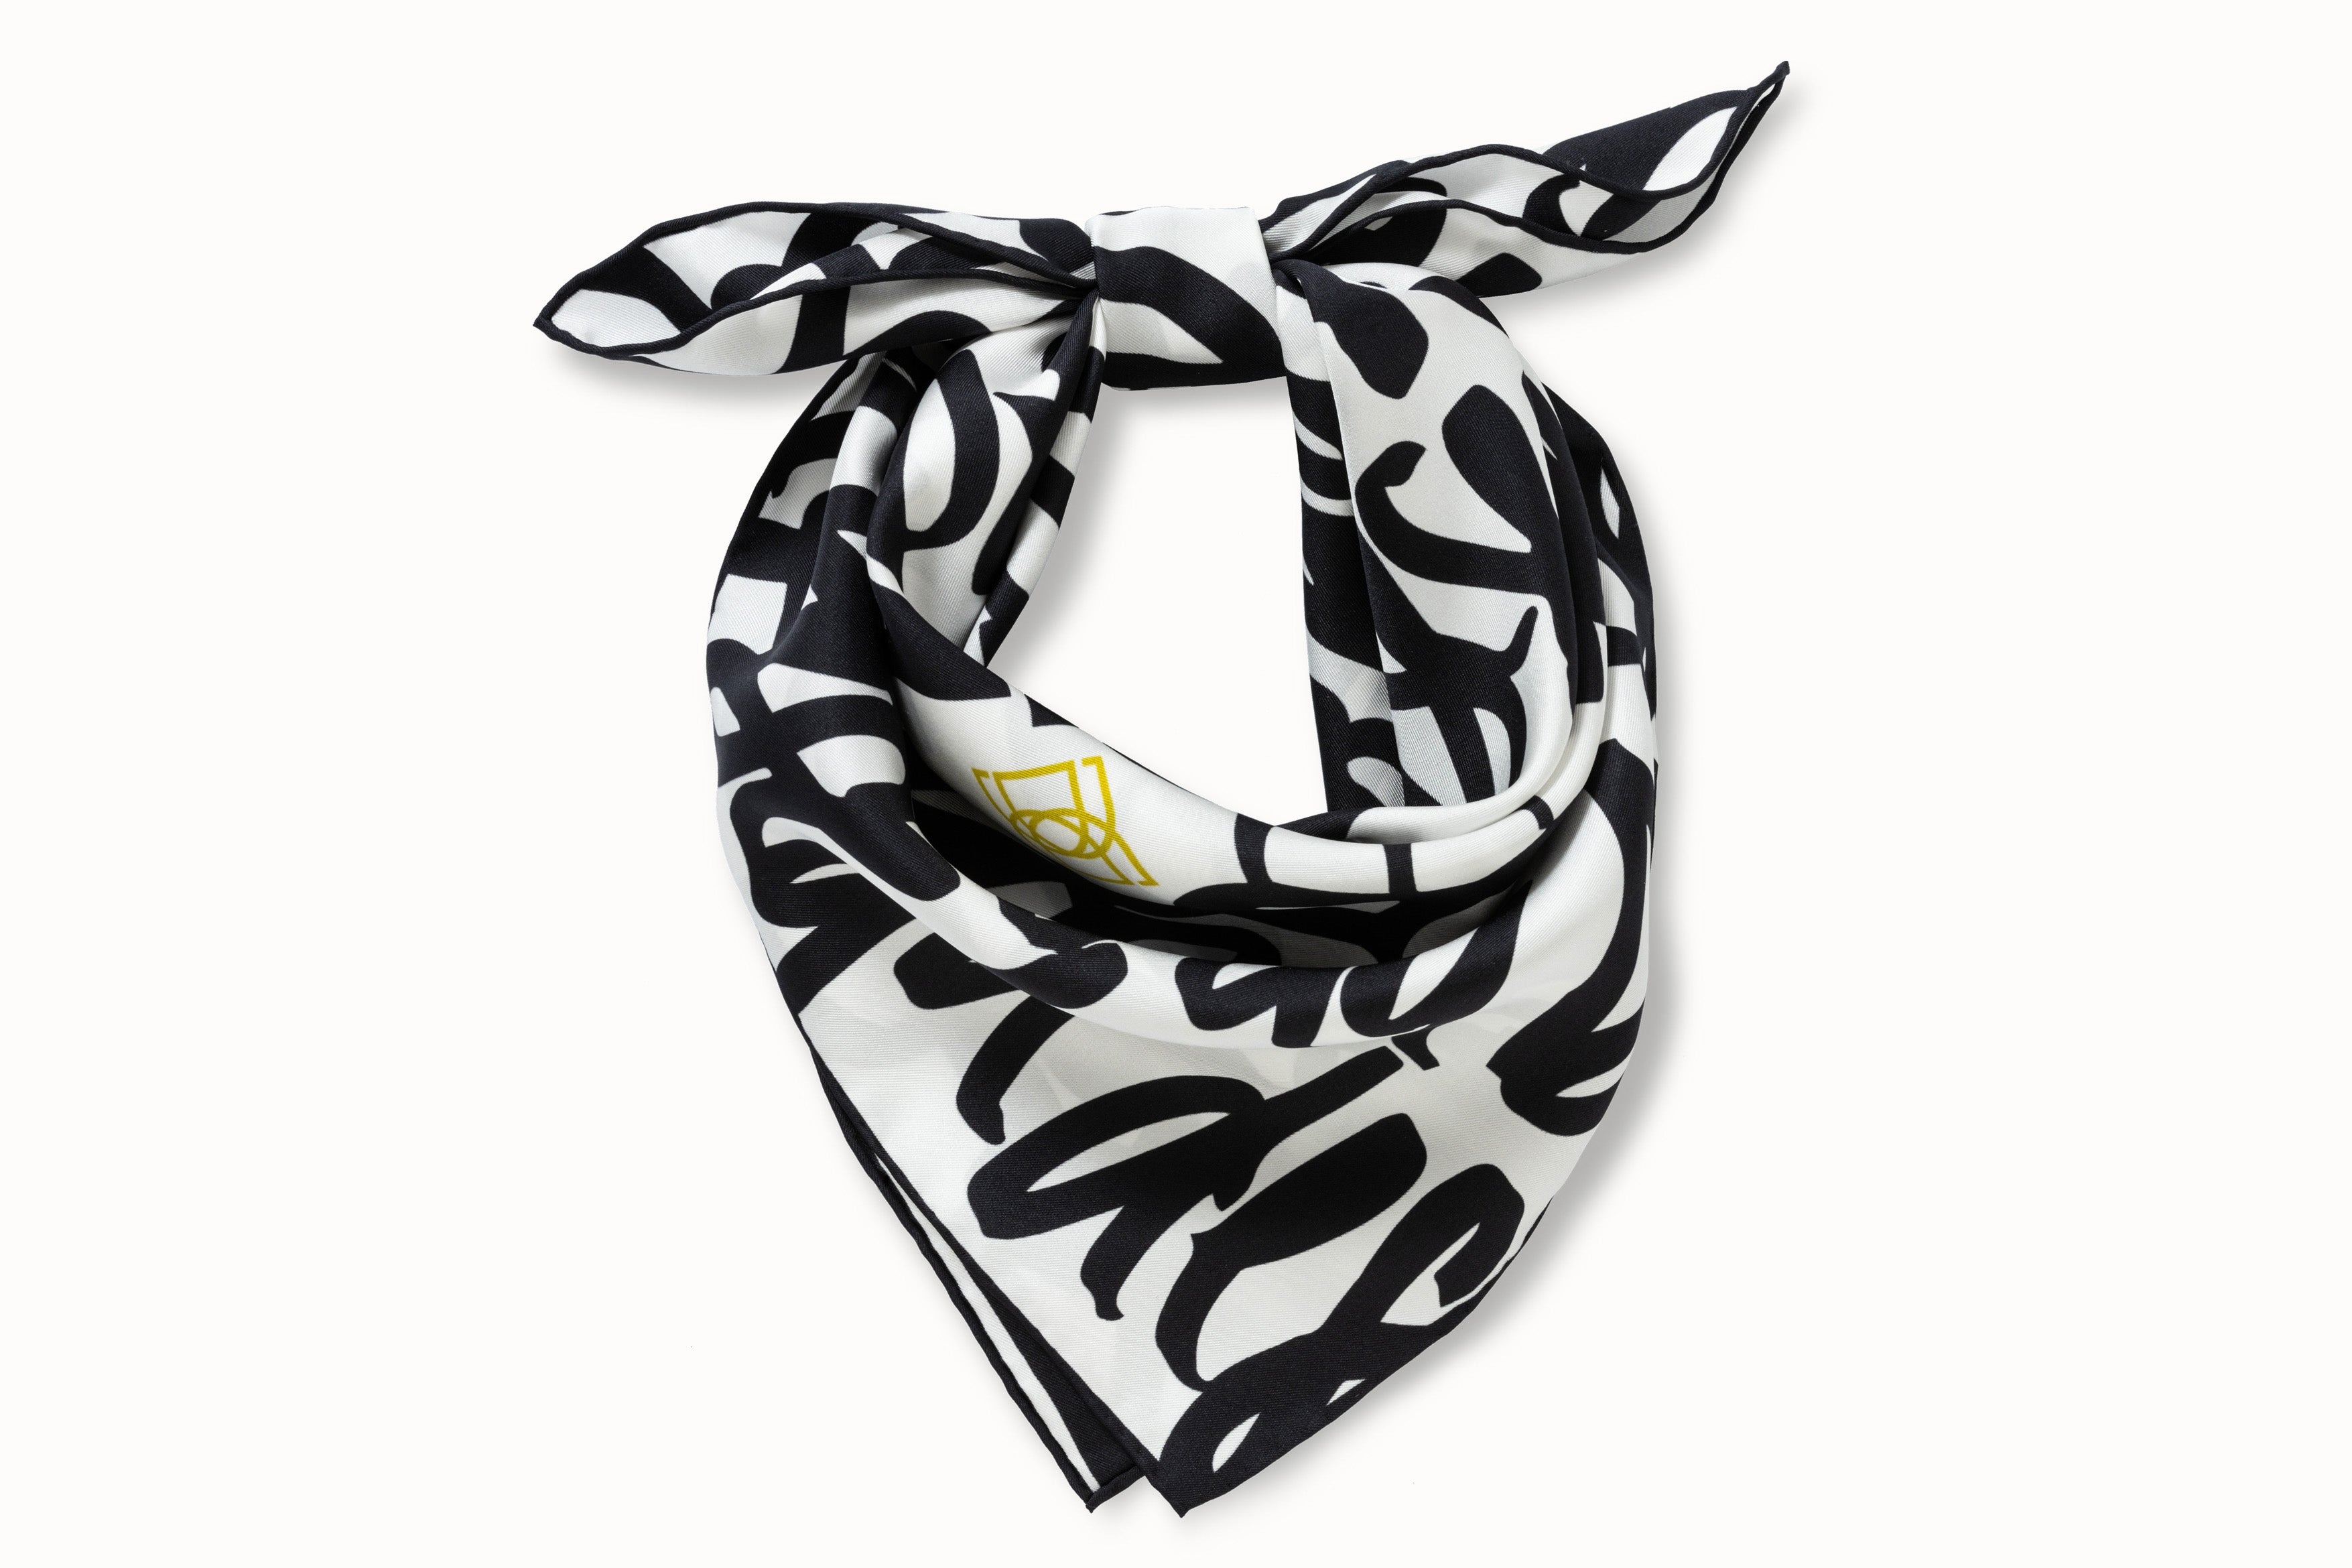 Rolled image of 100% silk square scarf featuring DESEDA written in black script on a repeat throughout the scarf on a white background. Features one small citron-colored DESEDA logo placed off-center in the design. Thin black border around the scarf’s edges.